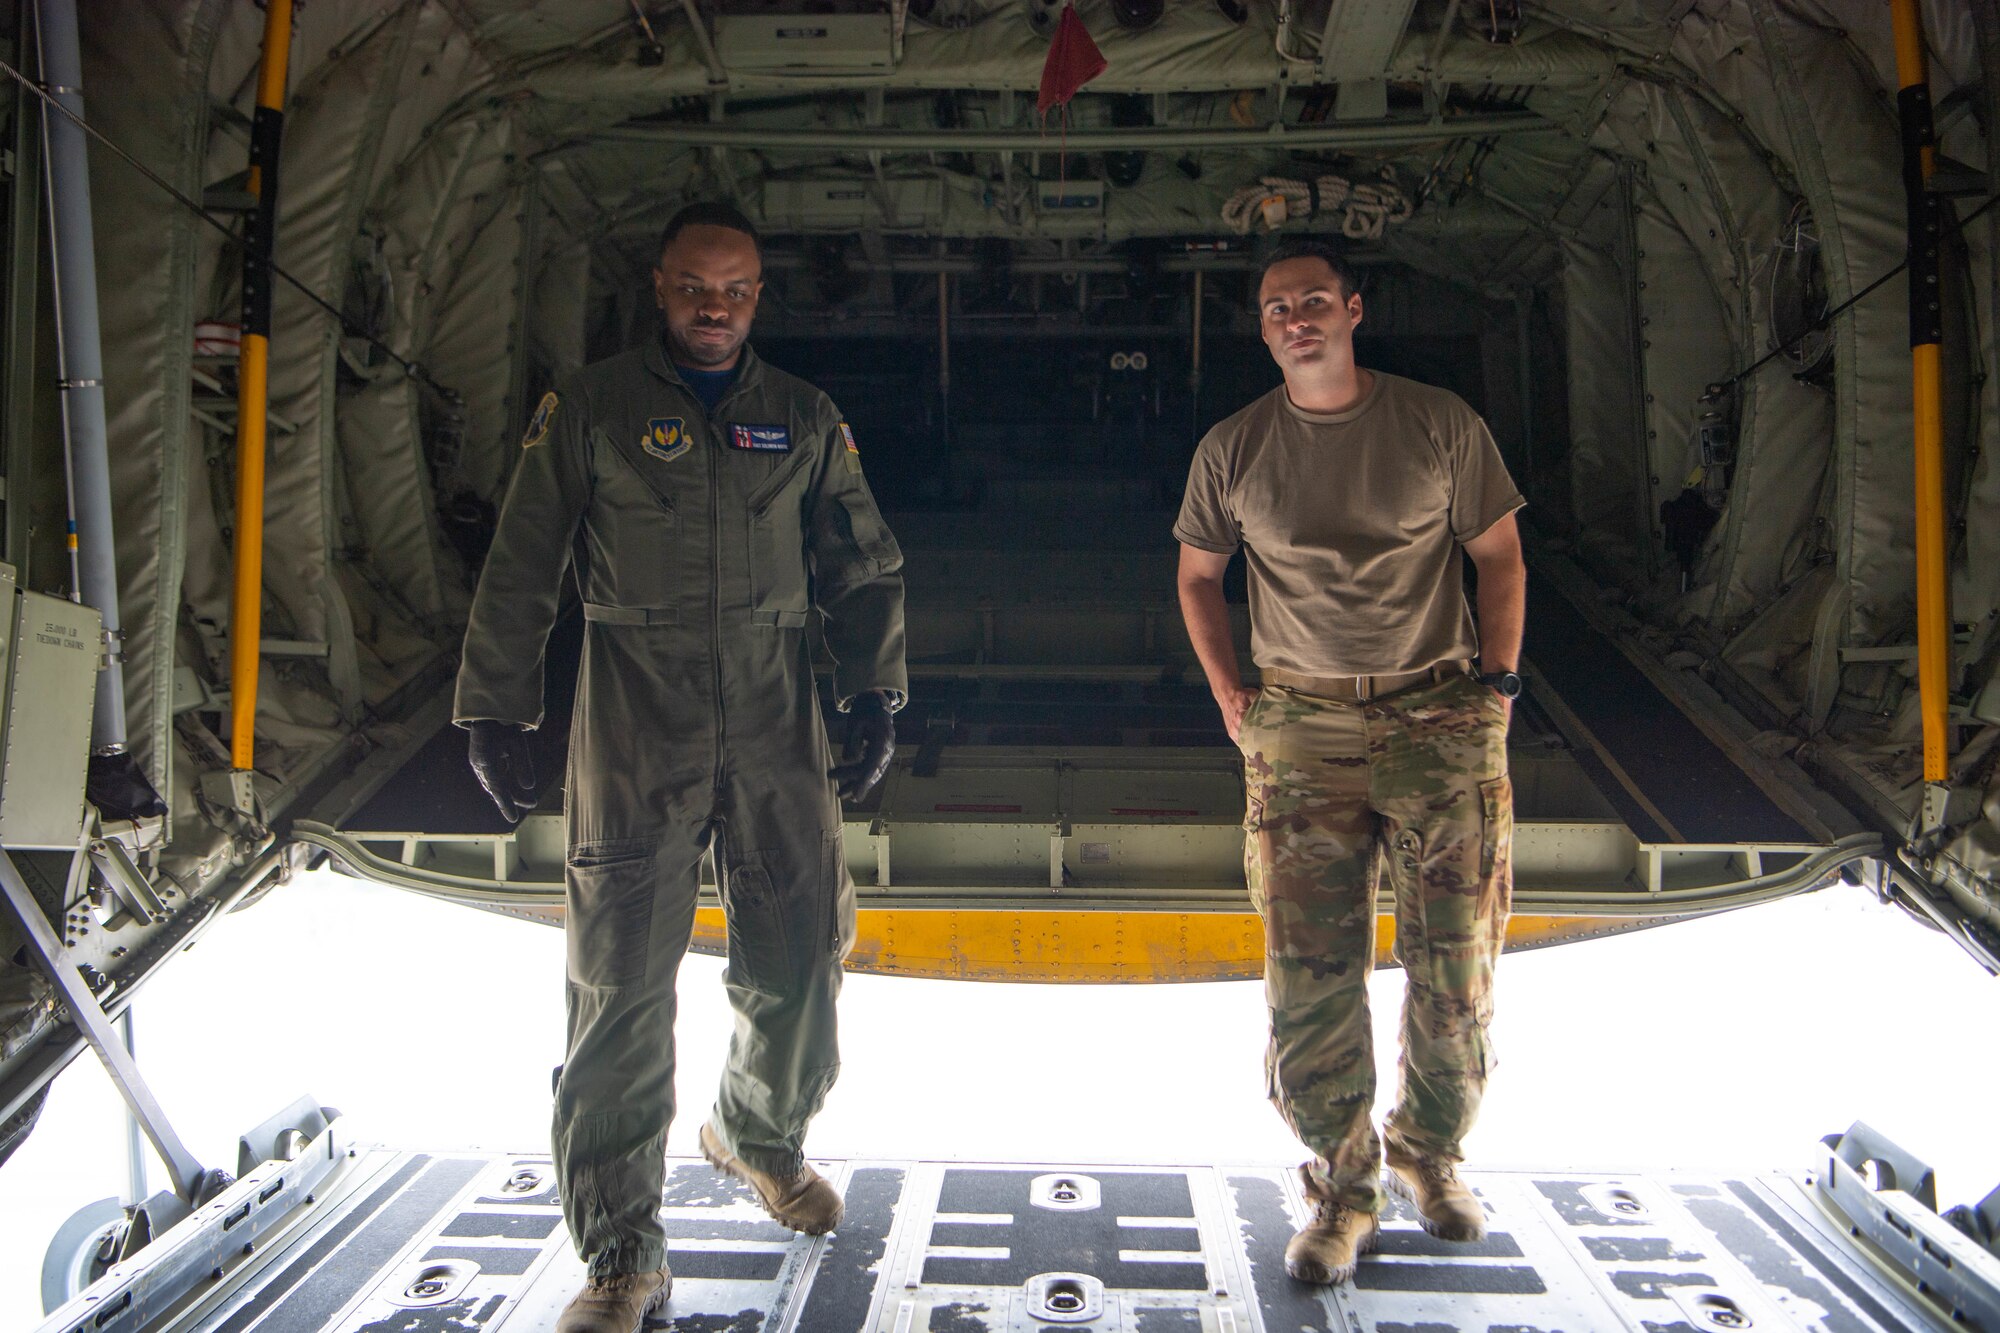 Staff Sgt. Solomon White, 37th Airlift Squadron loadmaster, left, and Maj. Brogan Otoole, 86th Operations Support Squadron chief of tactics, right, close the back of a C-130J Super Hercules aircraft ramp at Ramstein Air Base, Germany, June 6, 2021.